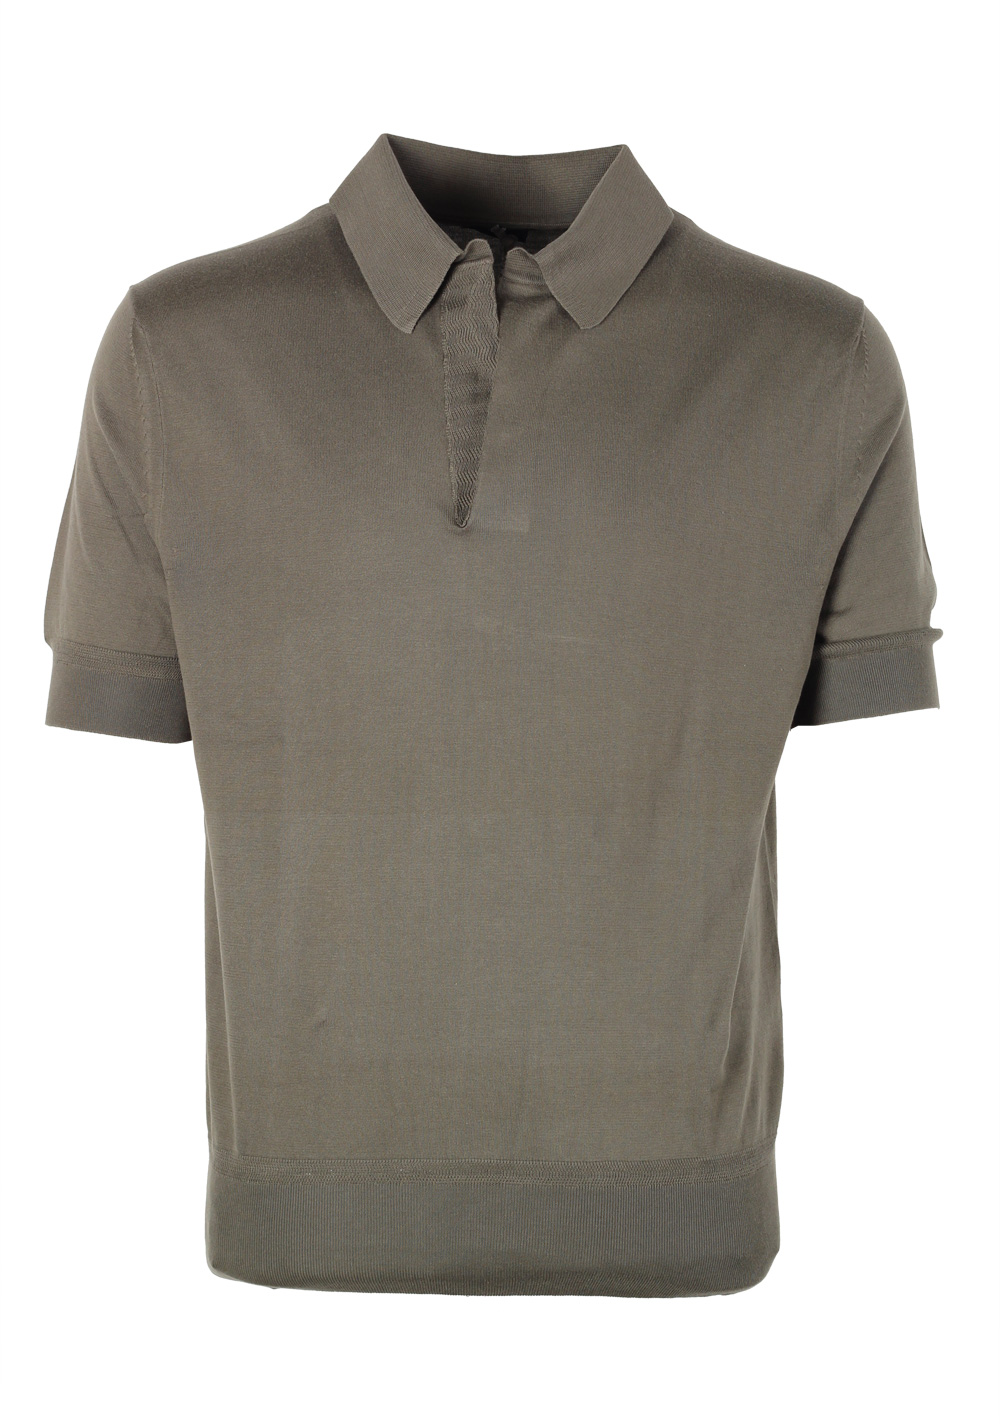 TOM FORD Green Short Sleeve Polo Shirt Size 54 / 44R U.S. | Costume Limité